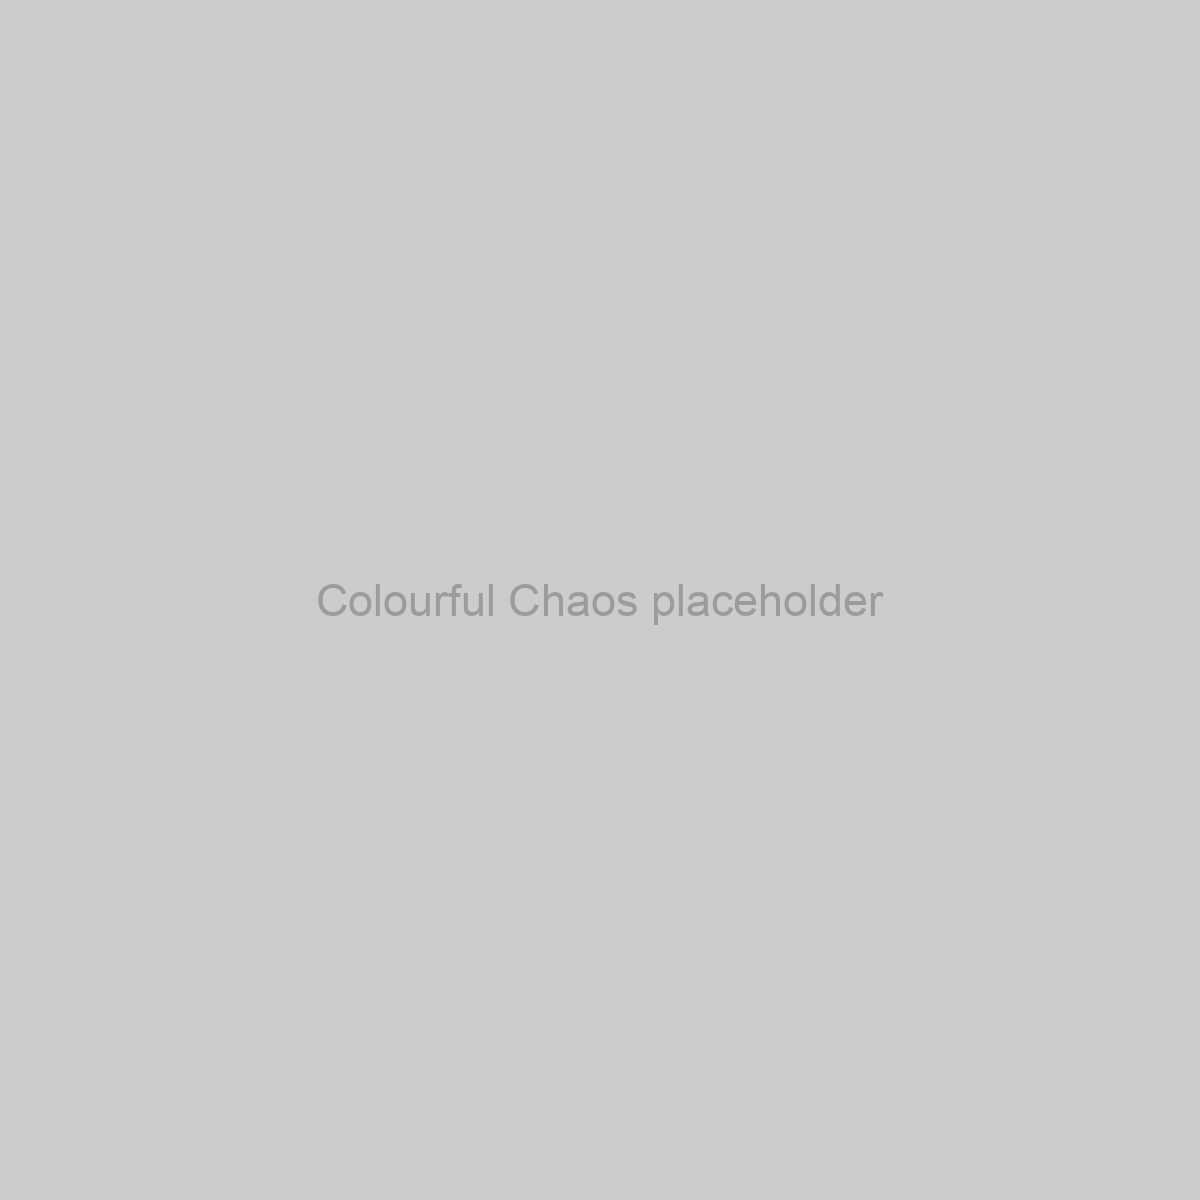 Colourful Chaos Placeholder Image